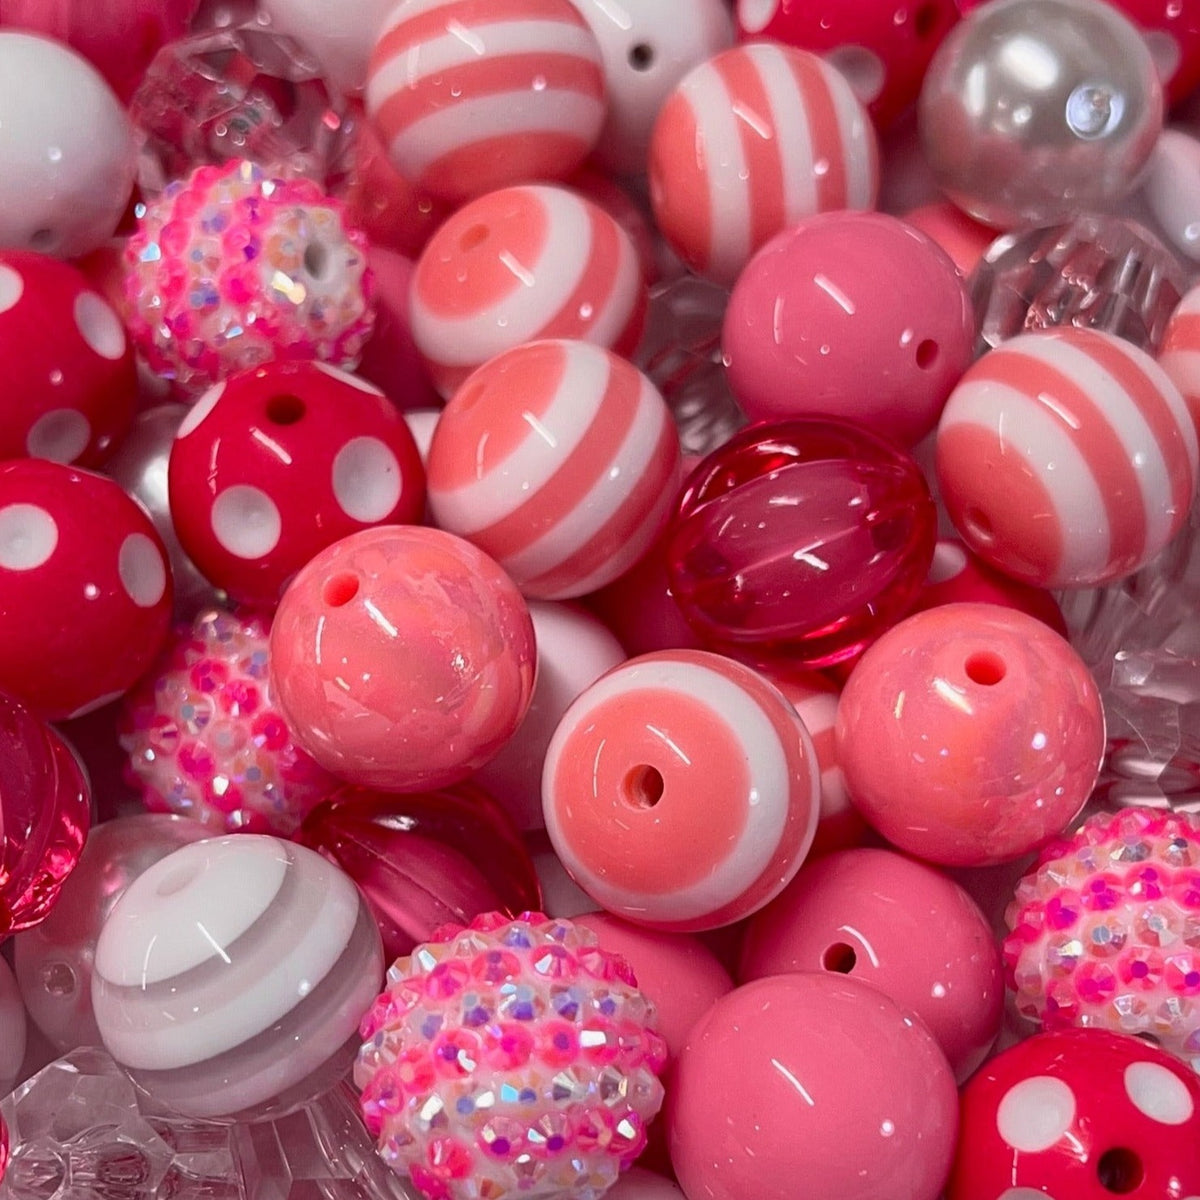 NEW Hot Pink Minnie Mouse Bubblegum bead, Acrylic Mickey Mouse Beads, –  Beadstobows